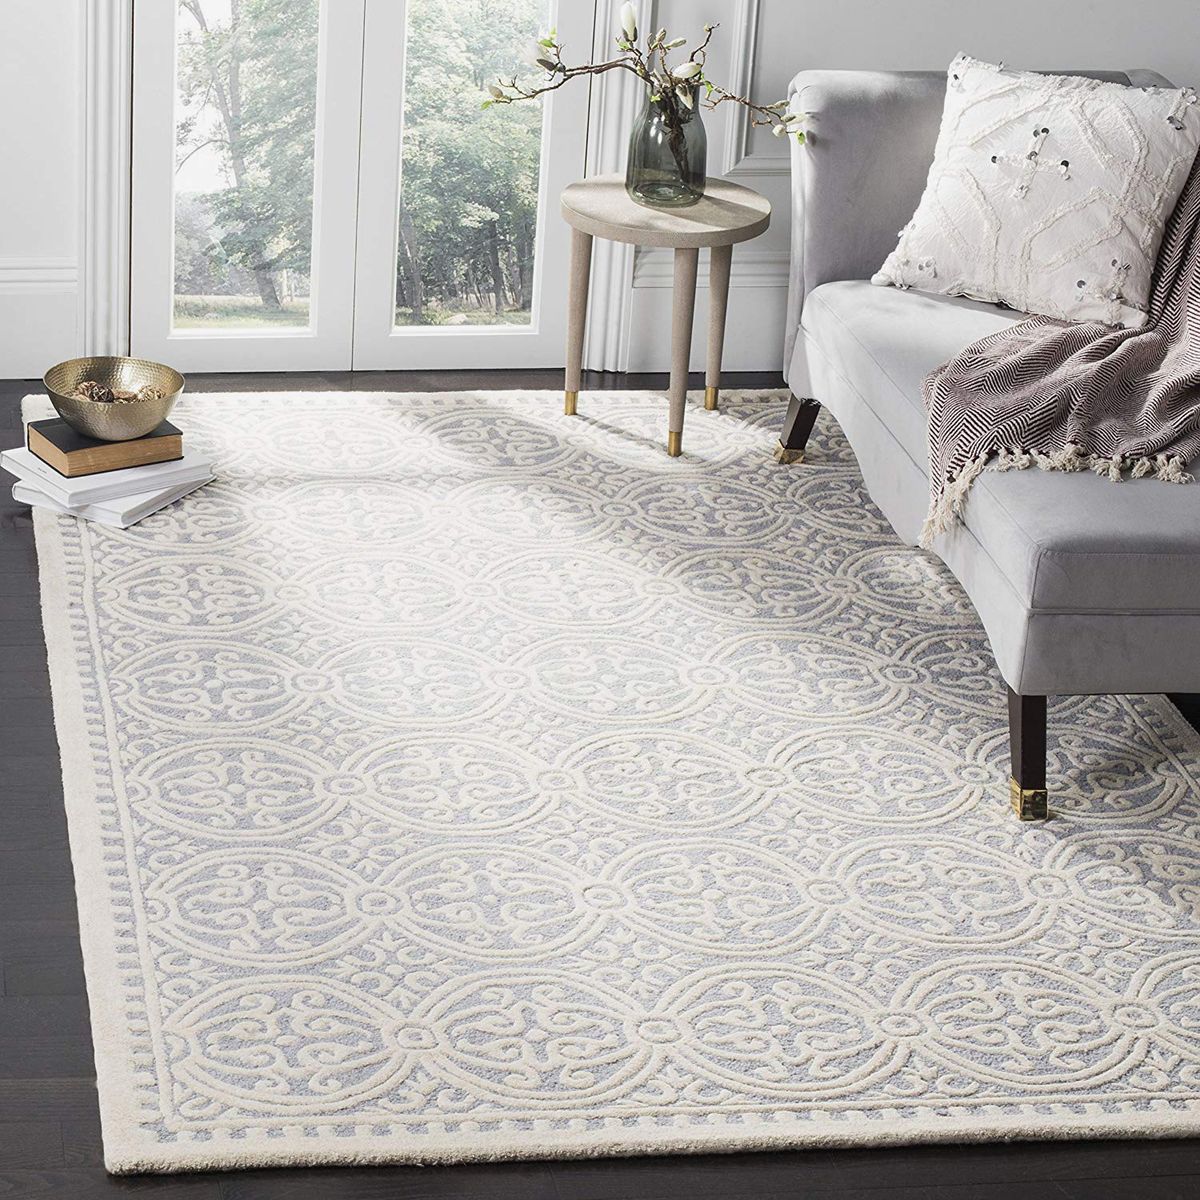 Kitchens Accent Pieces Breakfast Nooks Rugs.com Soft Solid Shag Collection Area Rug – 3x5 White Shag Rug Perfect for Entryways 